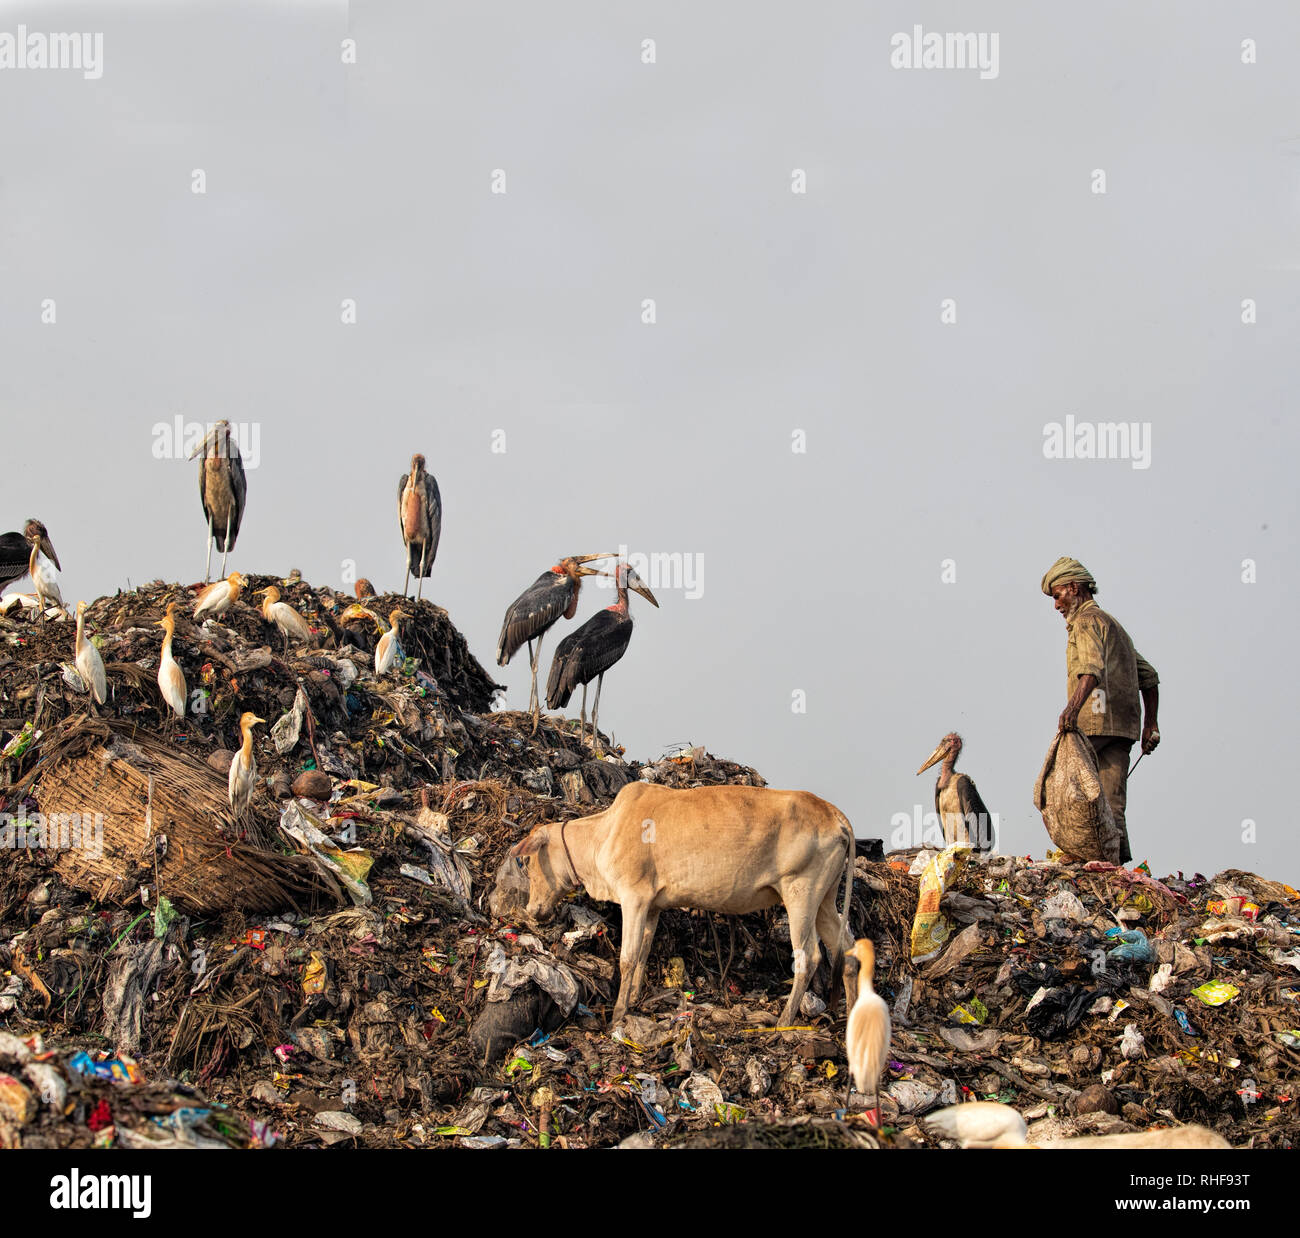 A waste picker walks amongst greater adjutants, cattle and egrets at a dump in Guwahati, India Stock Photo